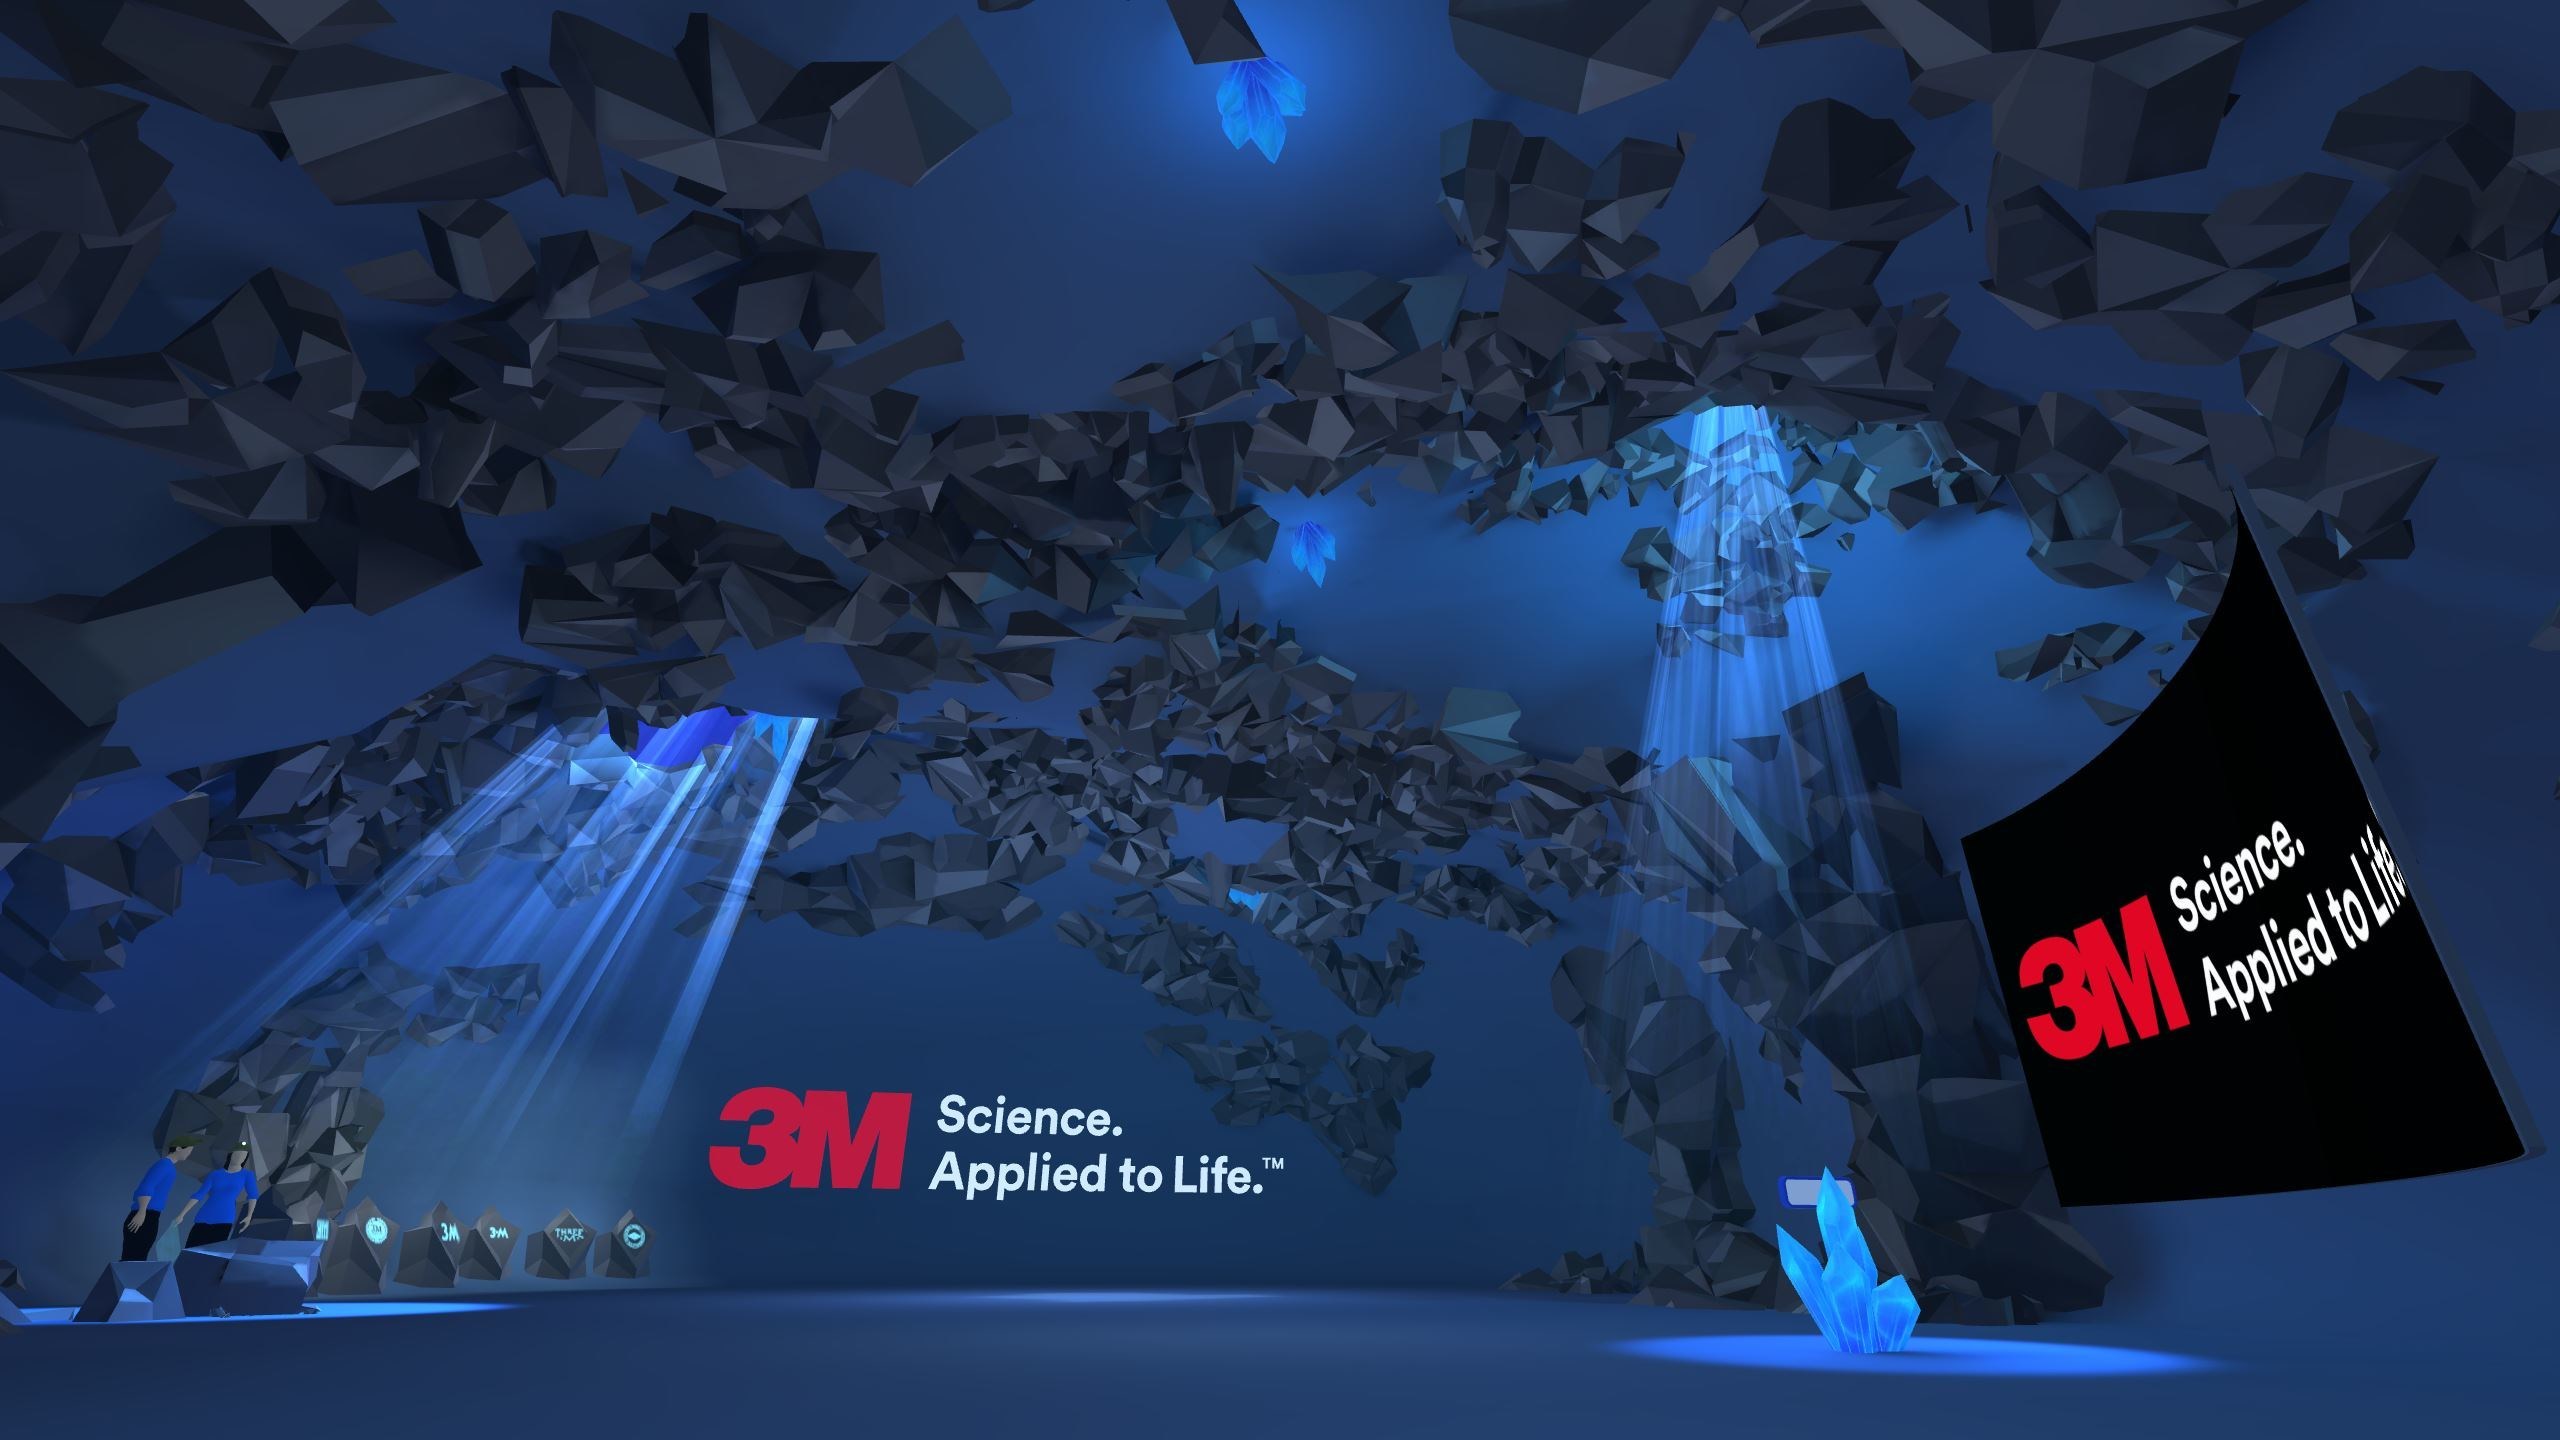 3M is launching 3M Futures